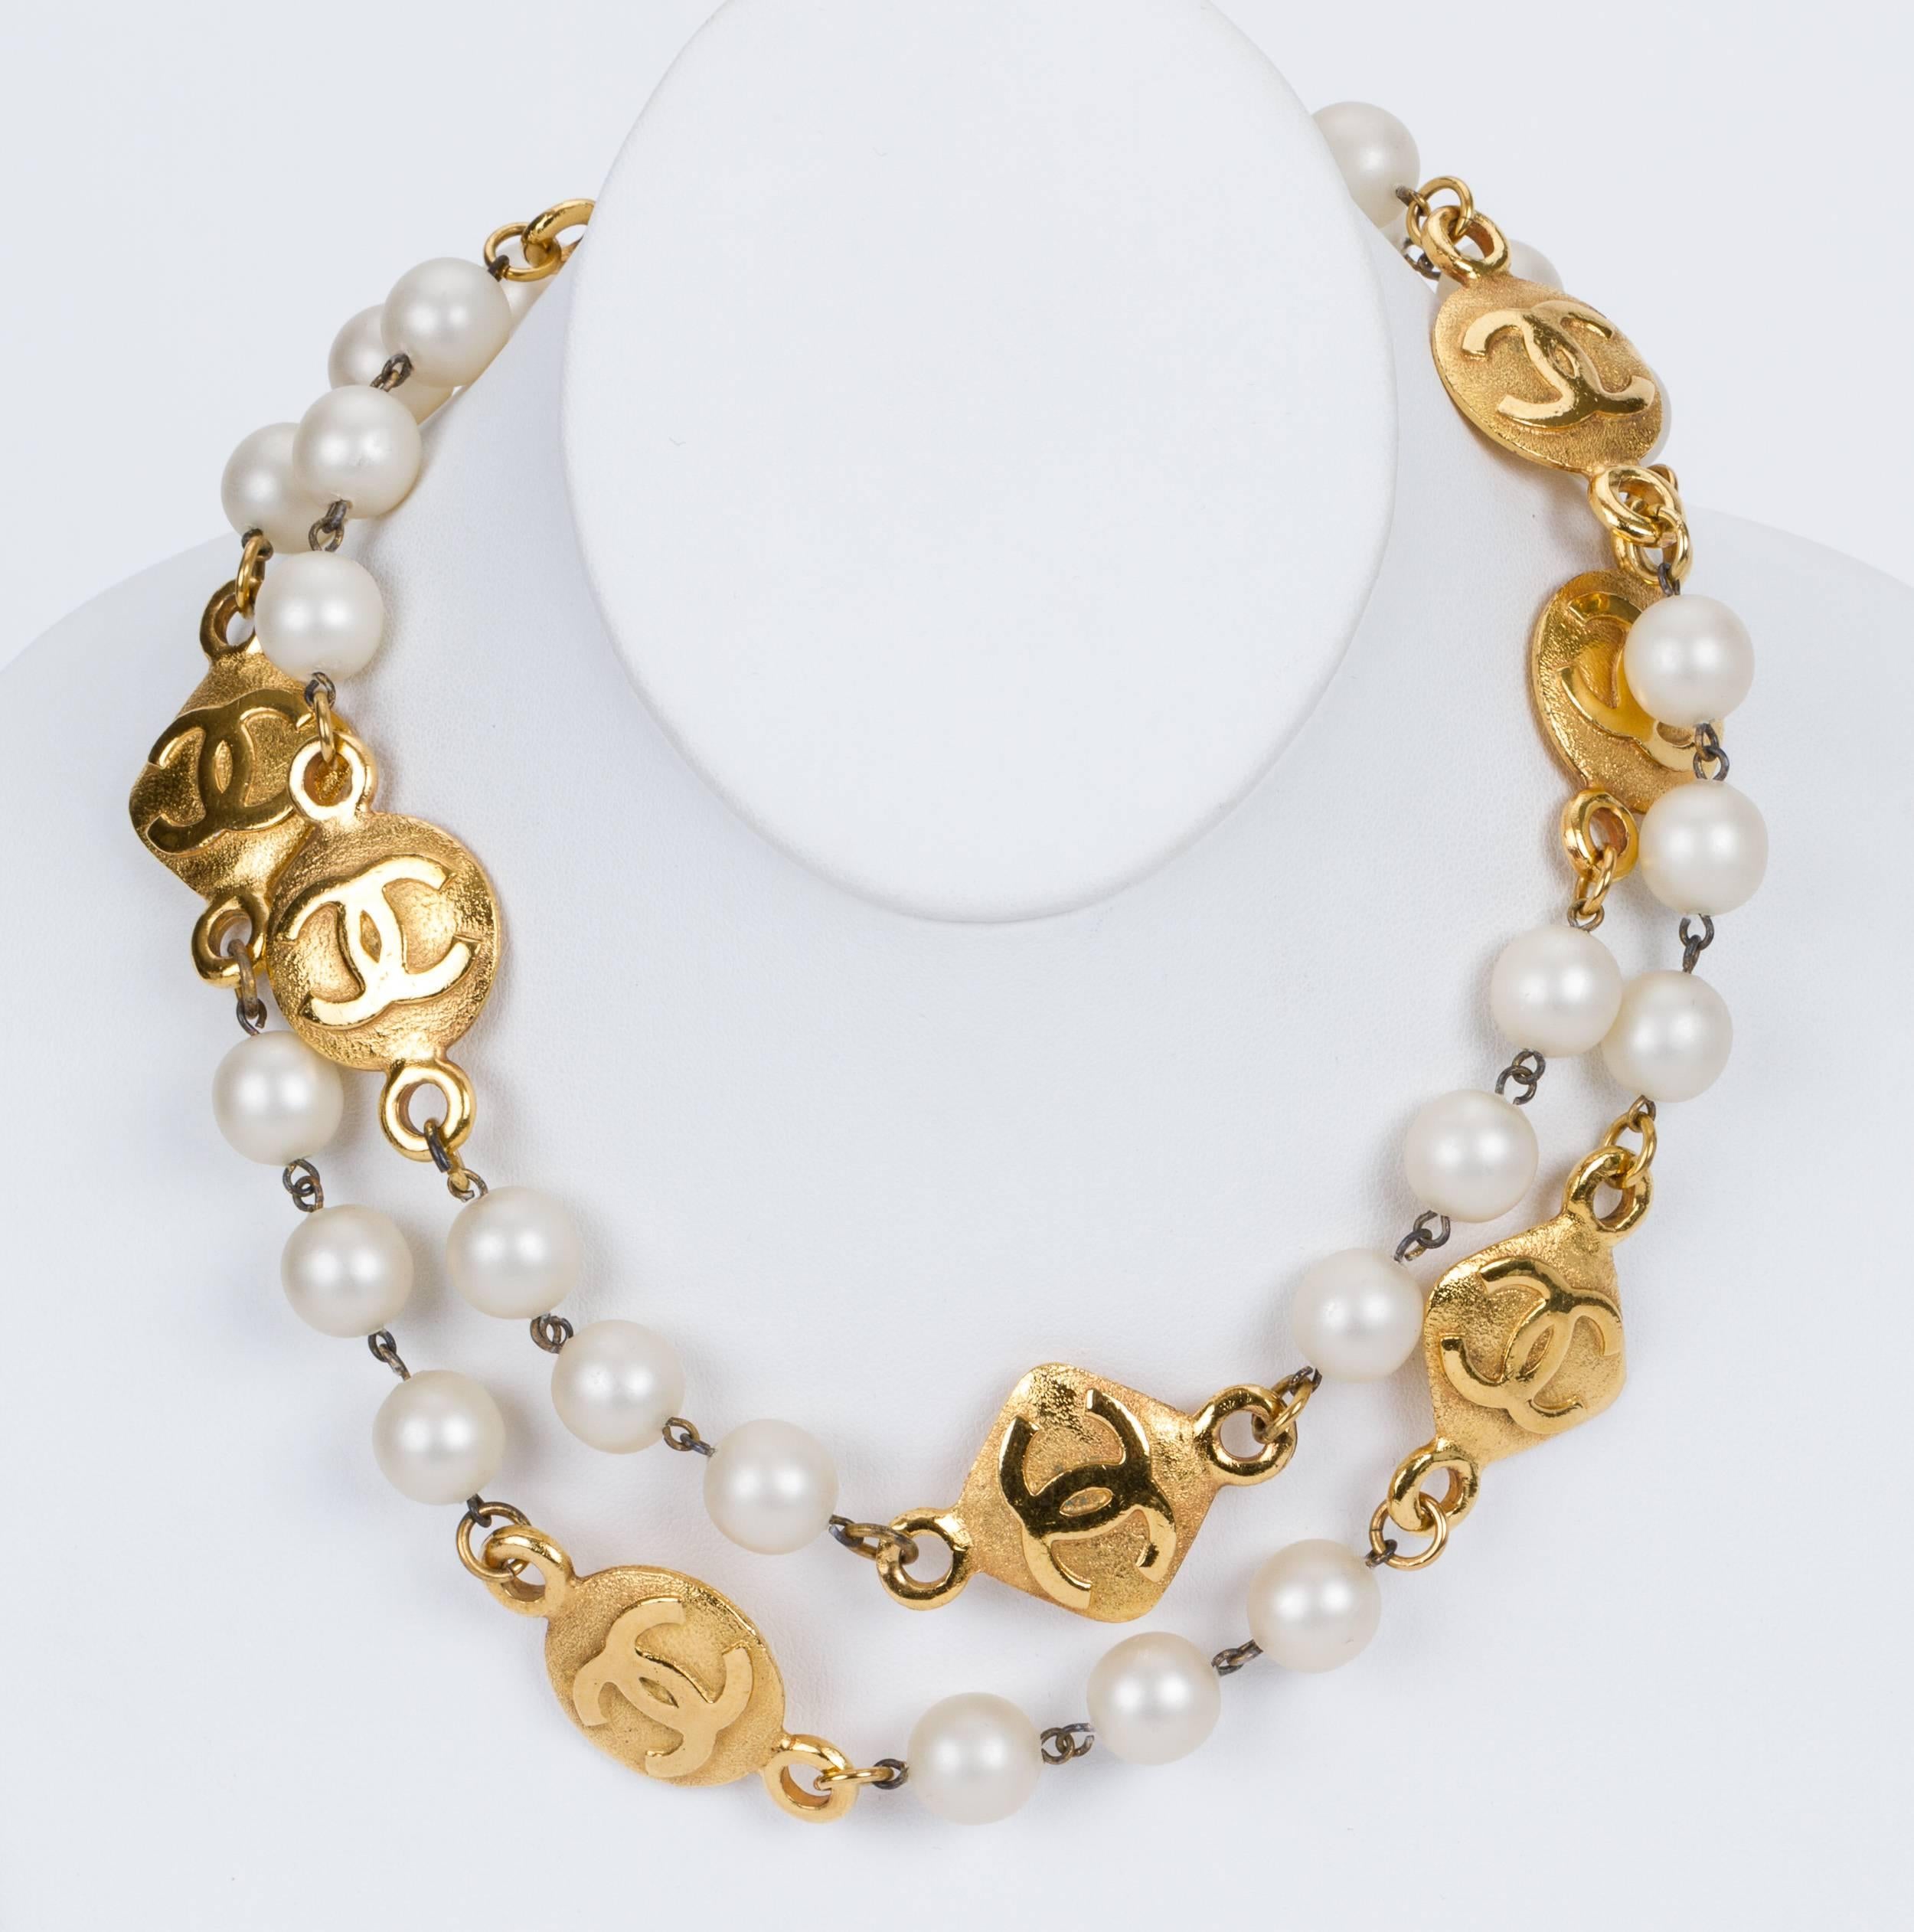 Chanel large pearl necklace with satin cc logo coins. Minor scuffs on pearls. Collection 2 cc 9, late 80s. Comes with original box.